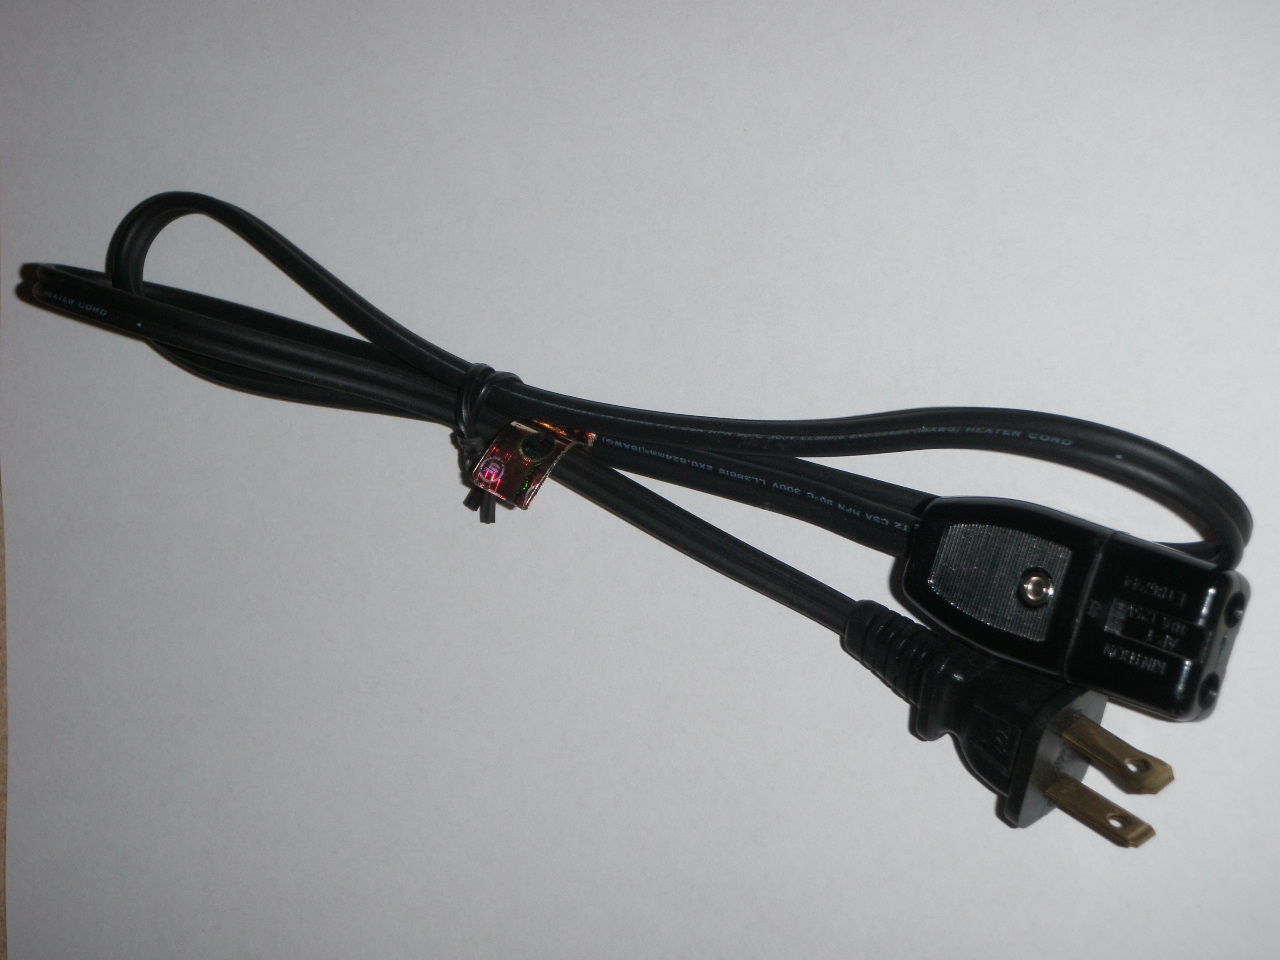 Power Cord for Sunbeam Controlled Heat Fry Pan Models FP-11 (Choose) FP-11A - $16.65 - $18.61